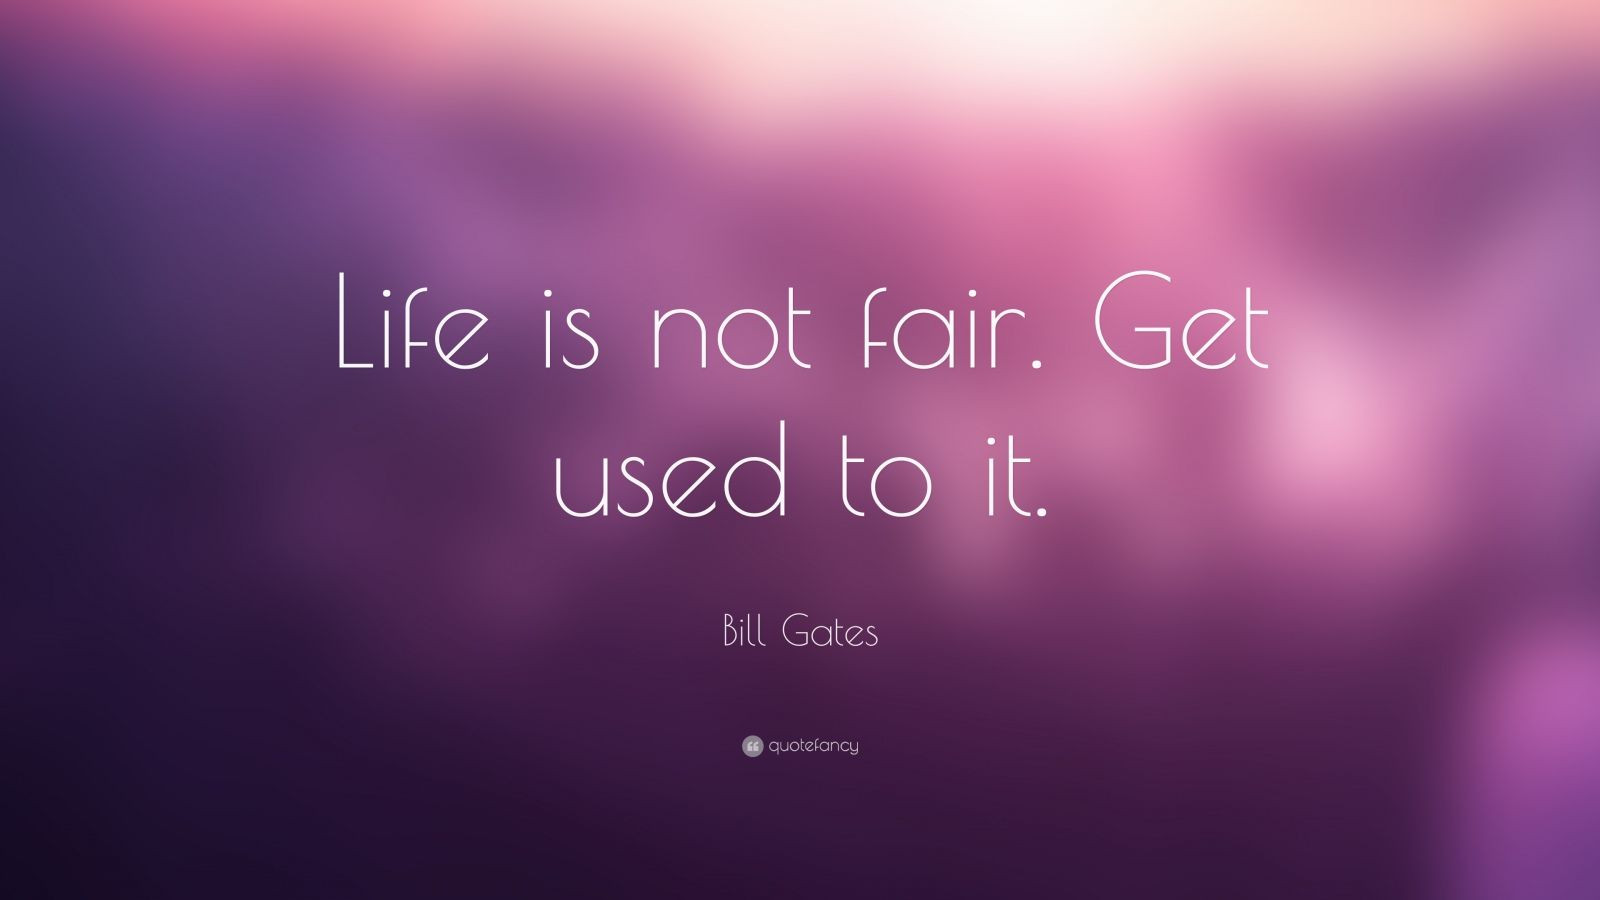 Life Is Not Fair Quotes
 Bill Gates Quote “Life is not fair Get used to it ” 6